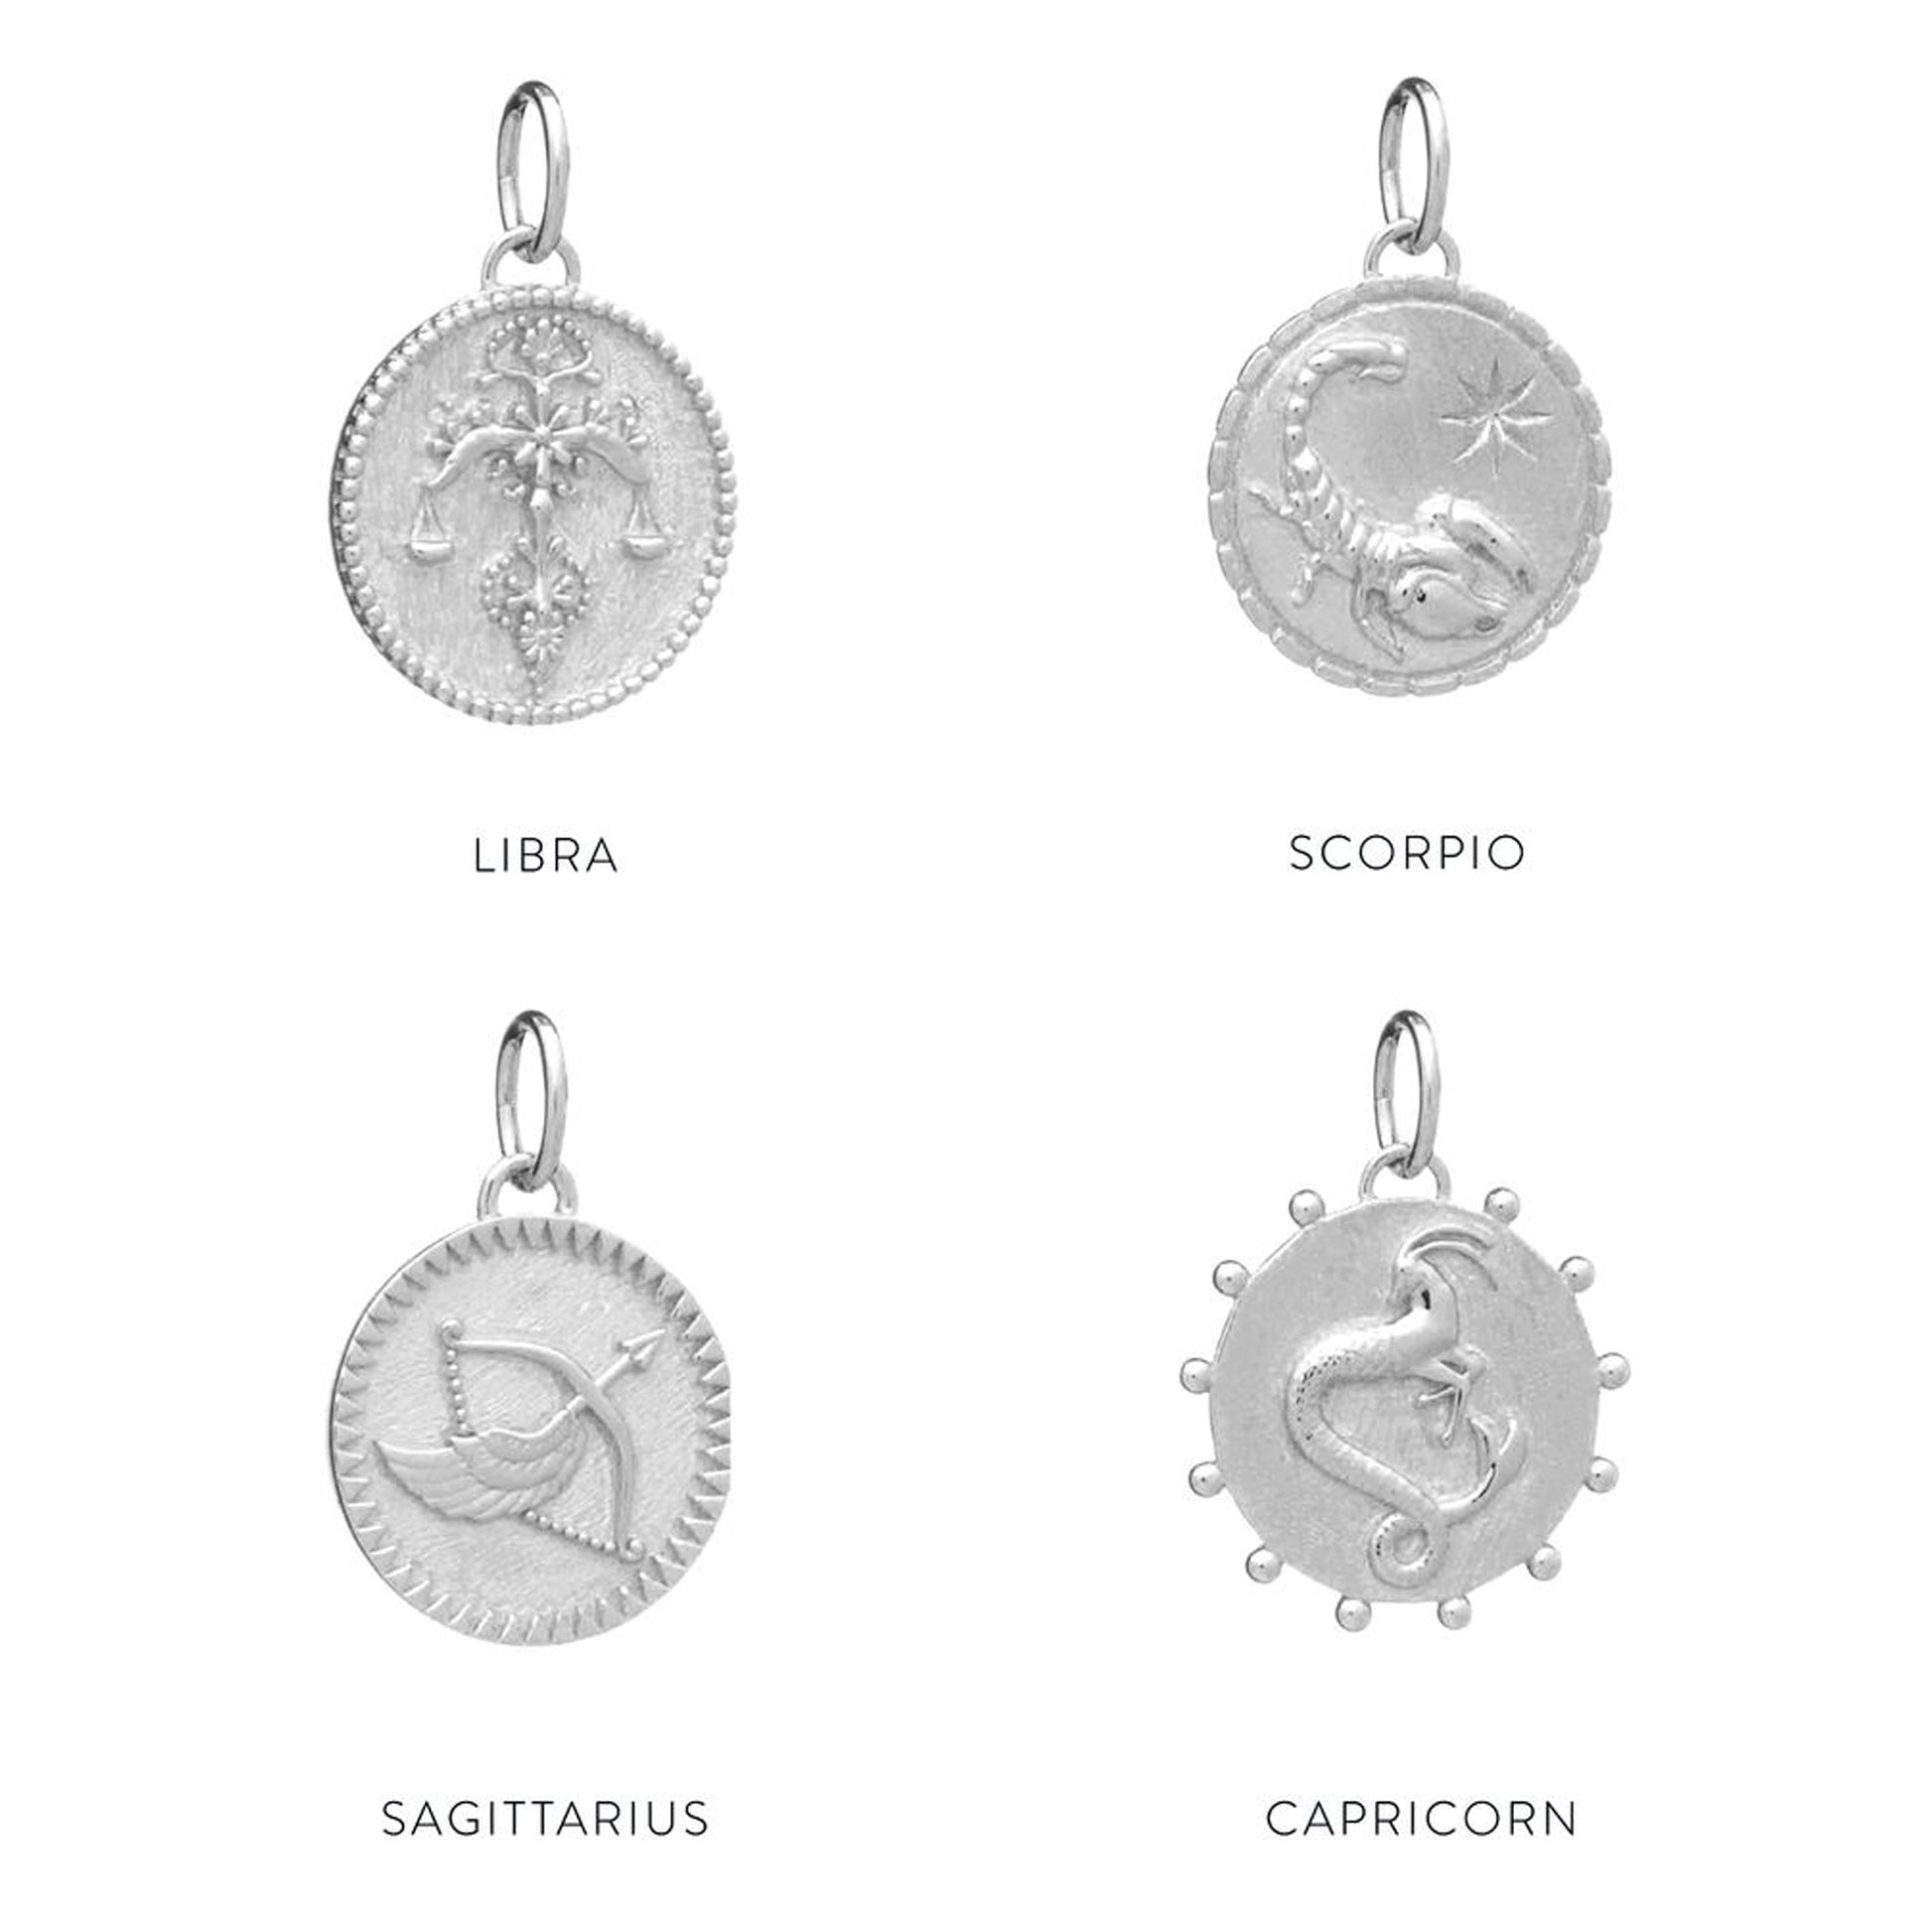 Libra and Scorpio enthusiasts can find stunning Rachel Jackson Zodiac Art Coin Necklaces and coin-inspired tattoo art.